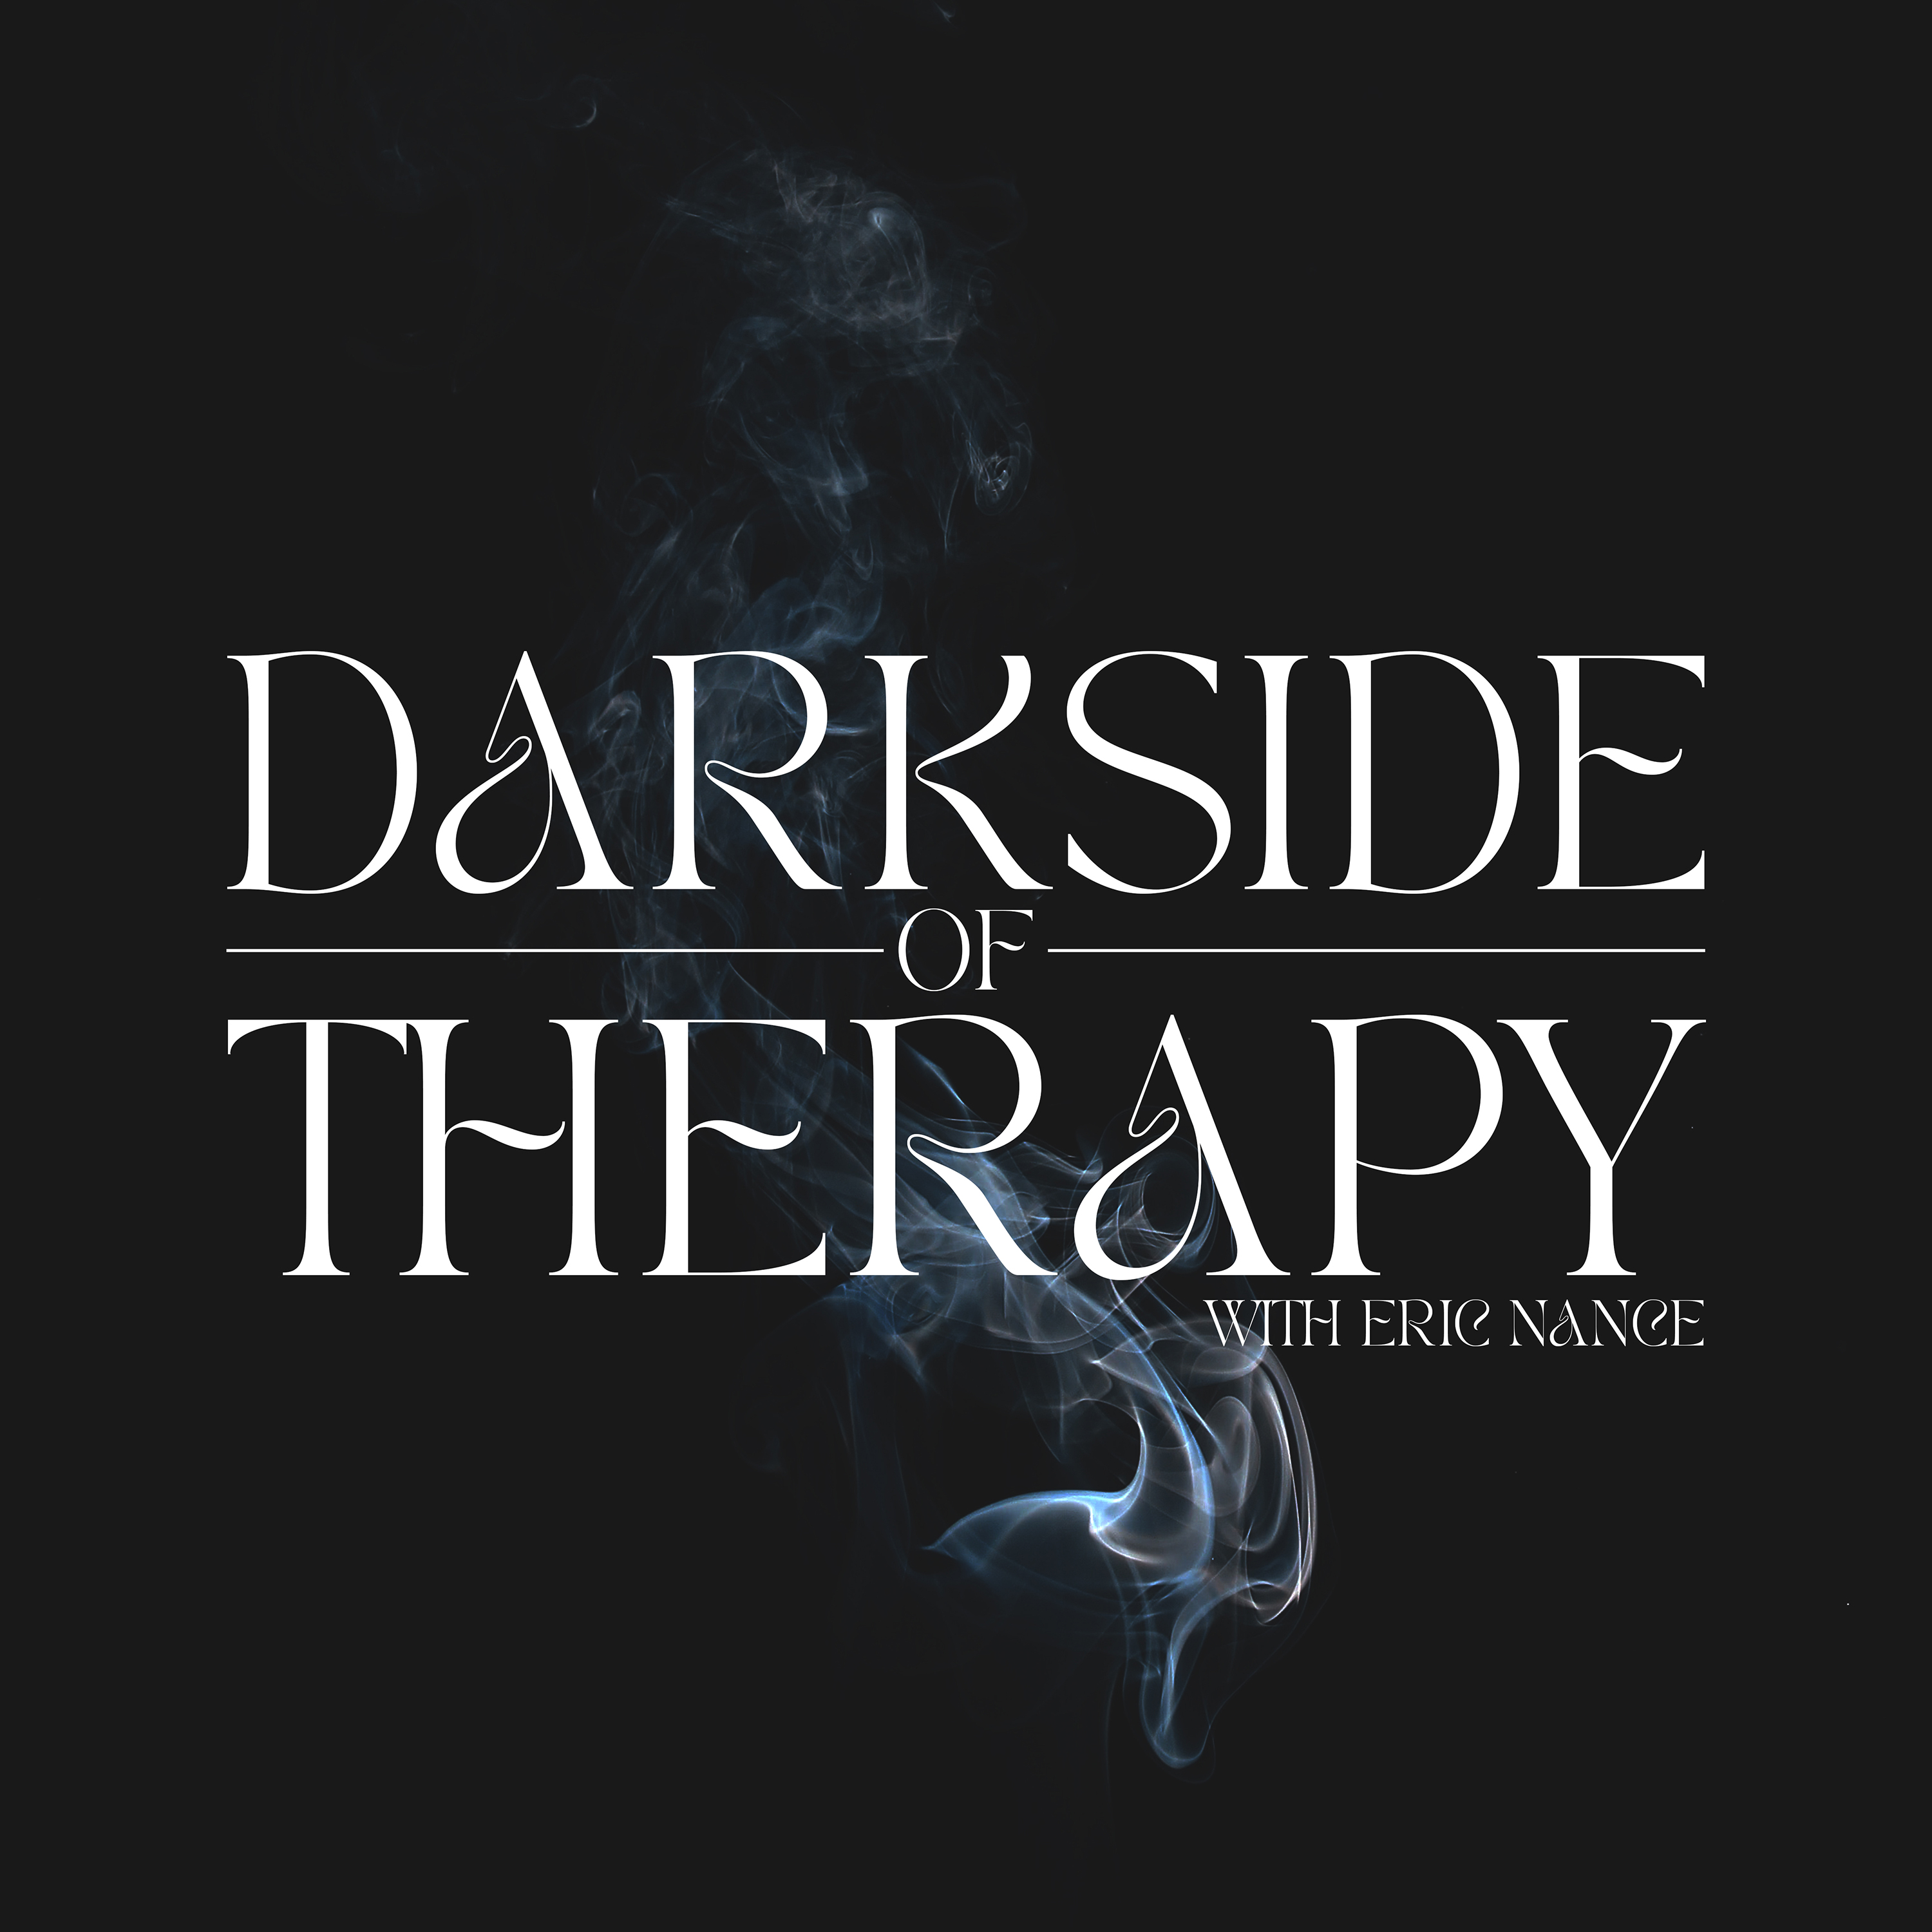 Artwork for podcast The Darkside of Therapy